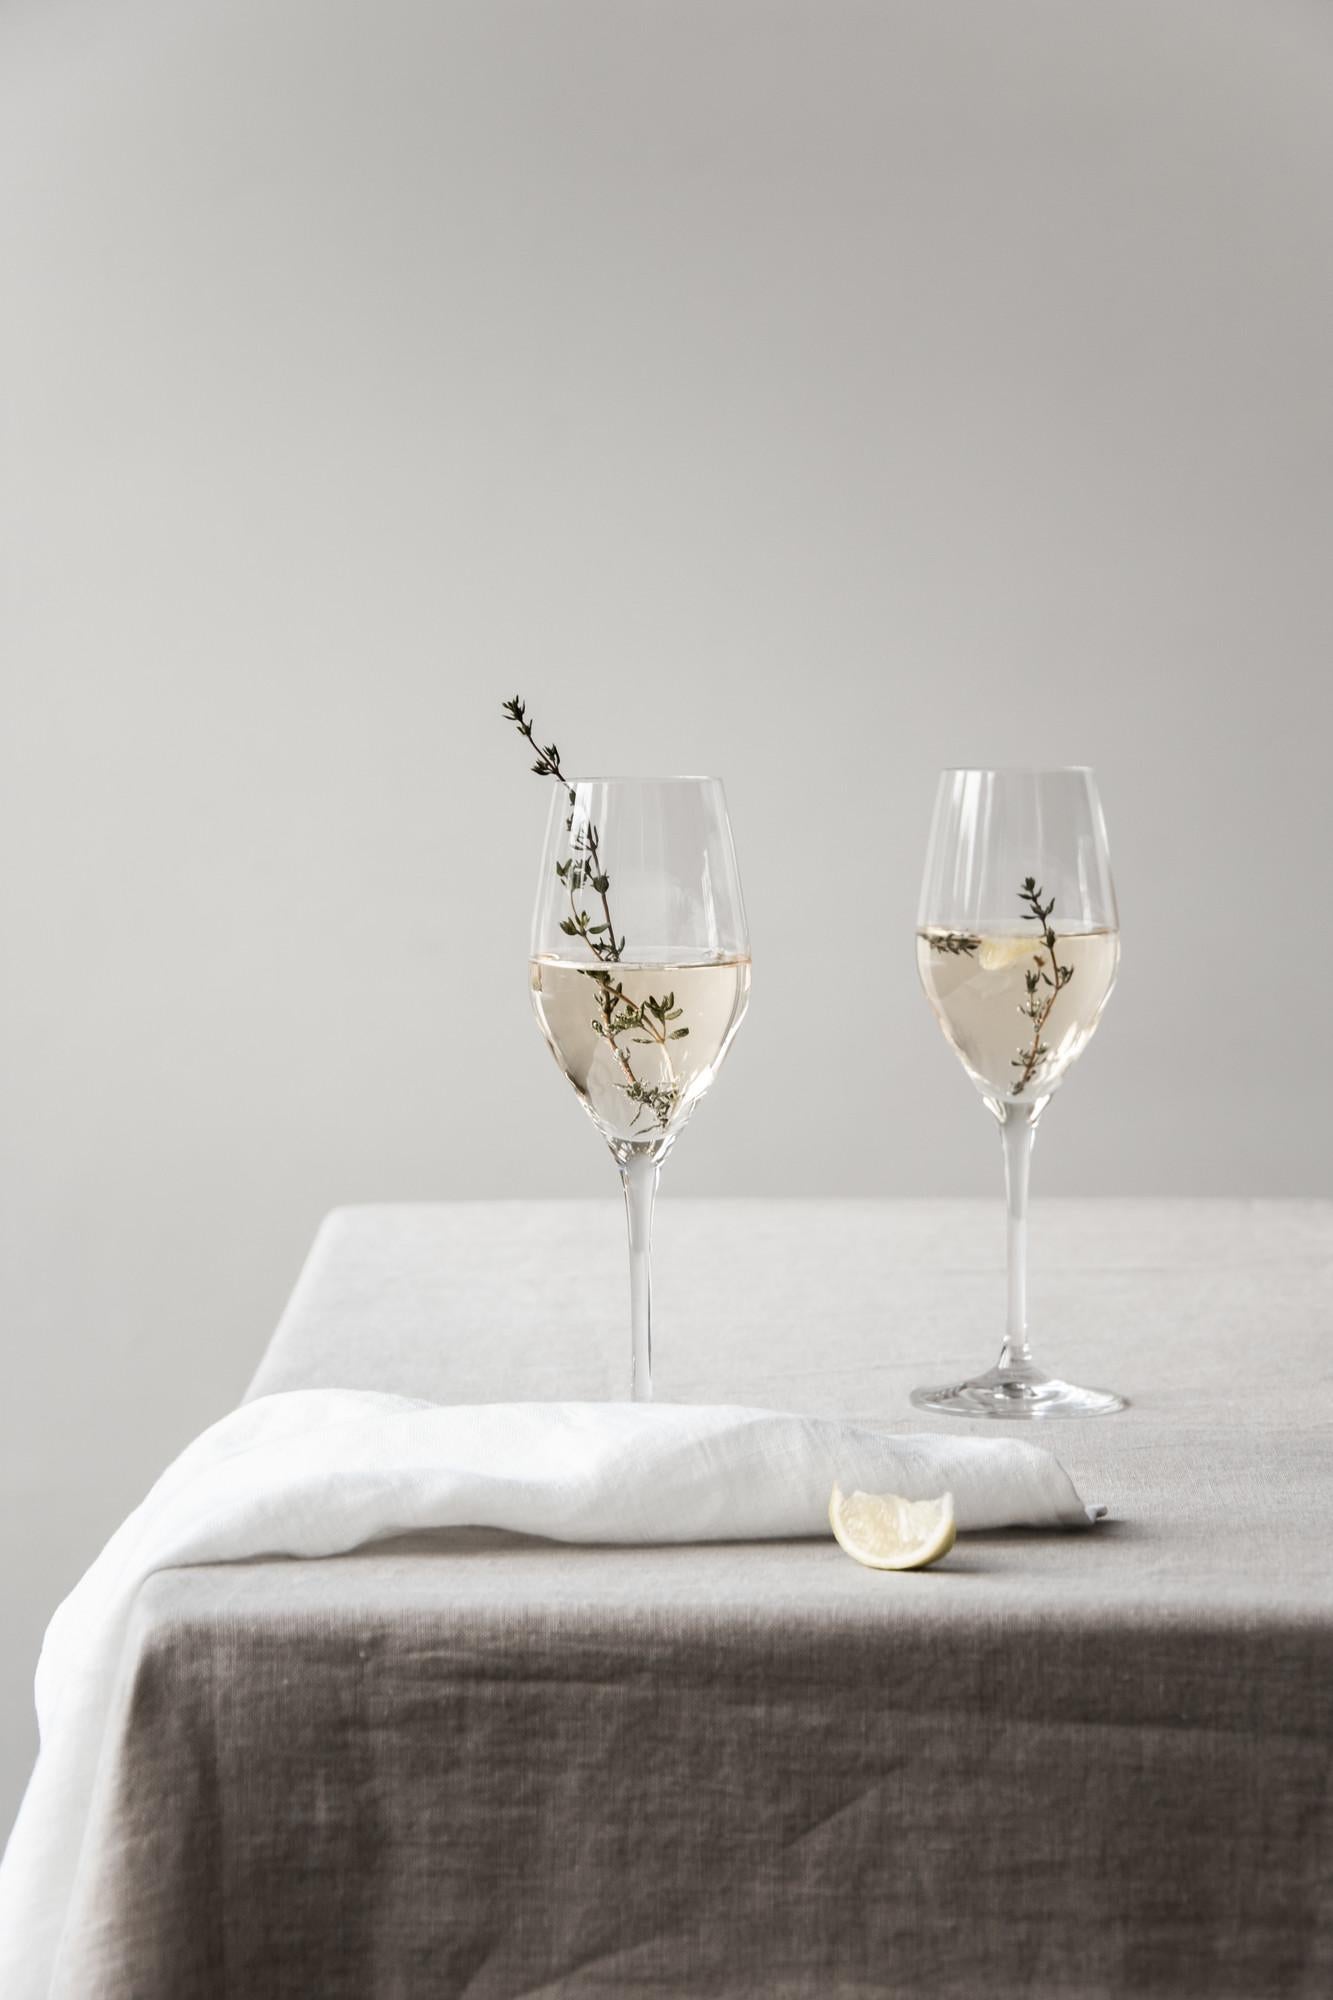 Sense Sparkling by Orrefors Designs, which holds 8.6 oz, is intended for sparkling beverages like Prosecco, Cava, Spumante, or Champagne. The tulip-shaped bowl allows the aromas in the drink to develop.
